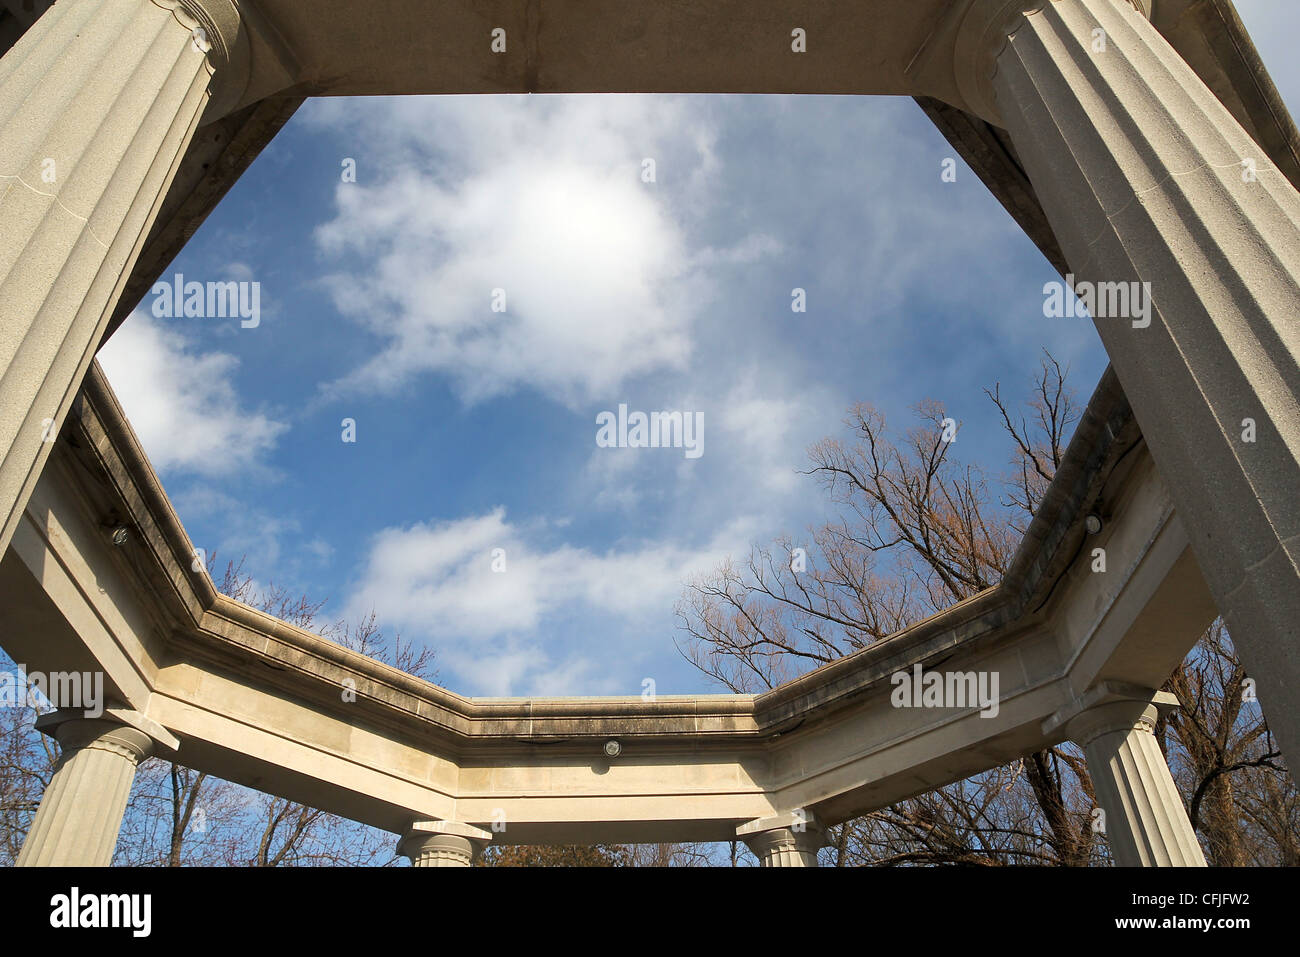 Looking at the sky through Saratoga Springs' War Memorial, built in 1932 to honor veterans of World War I, in Congress Park. Stock Photo